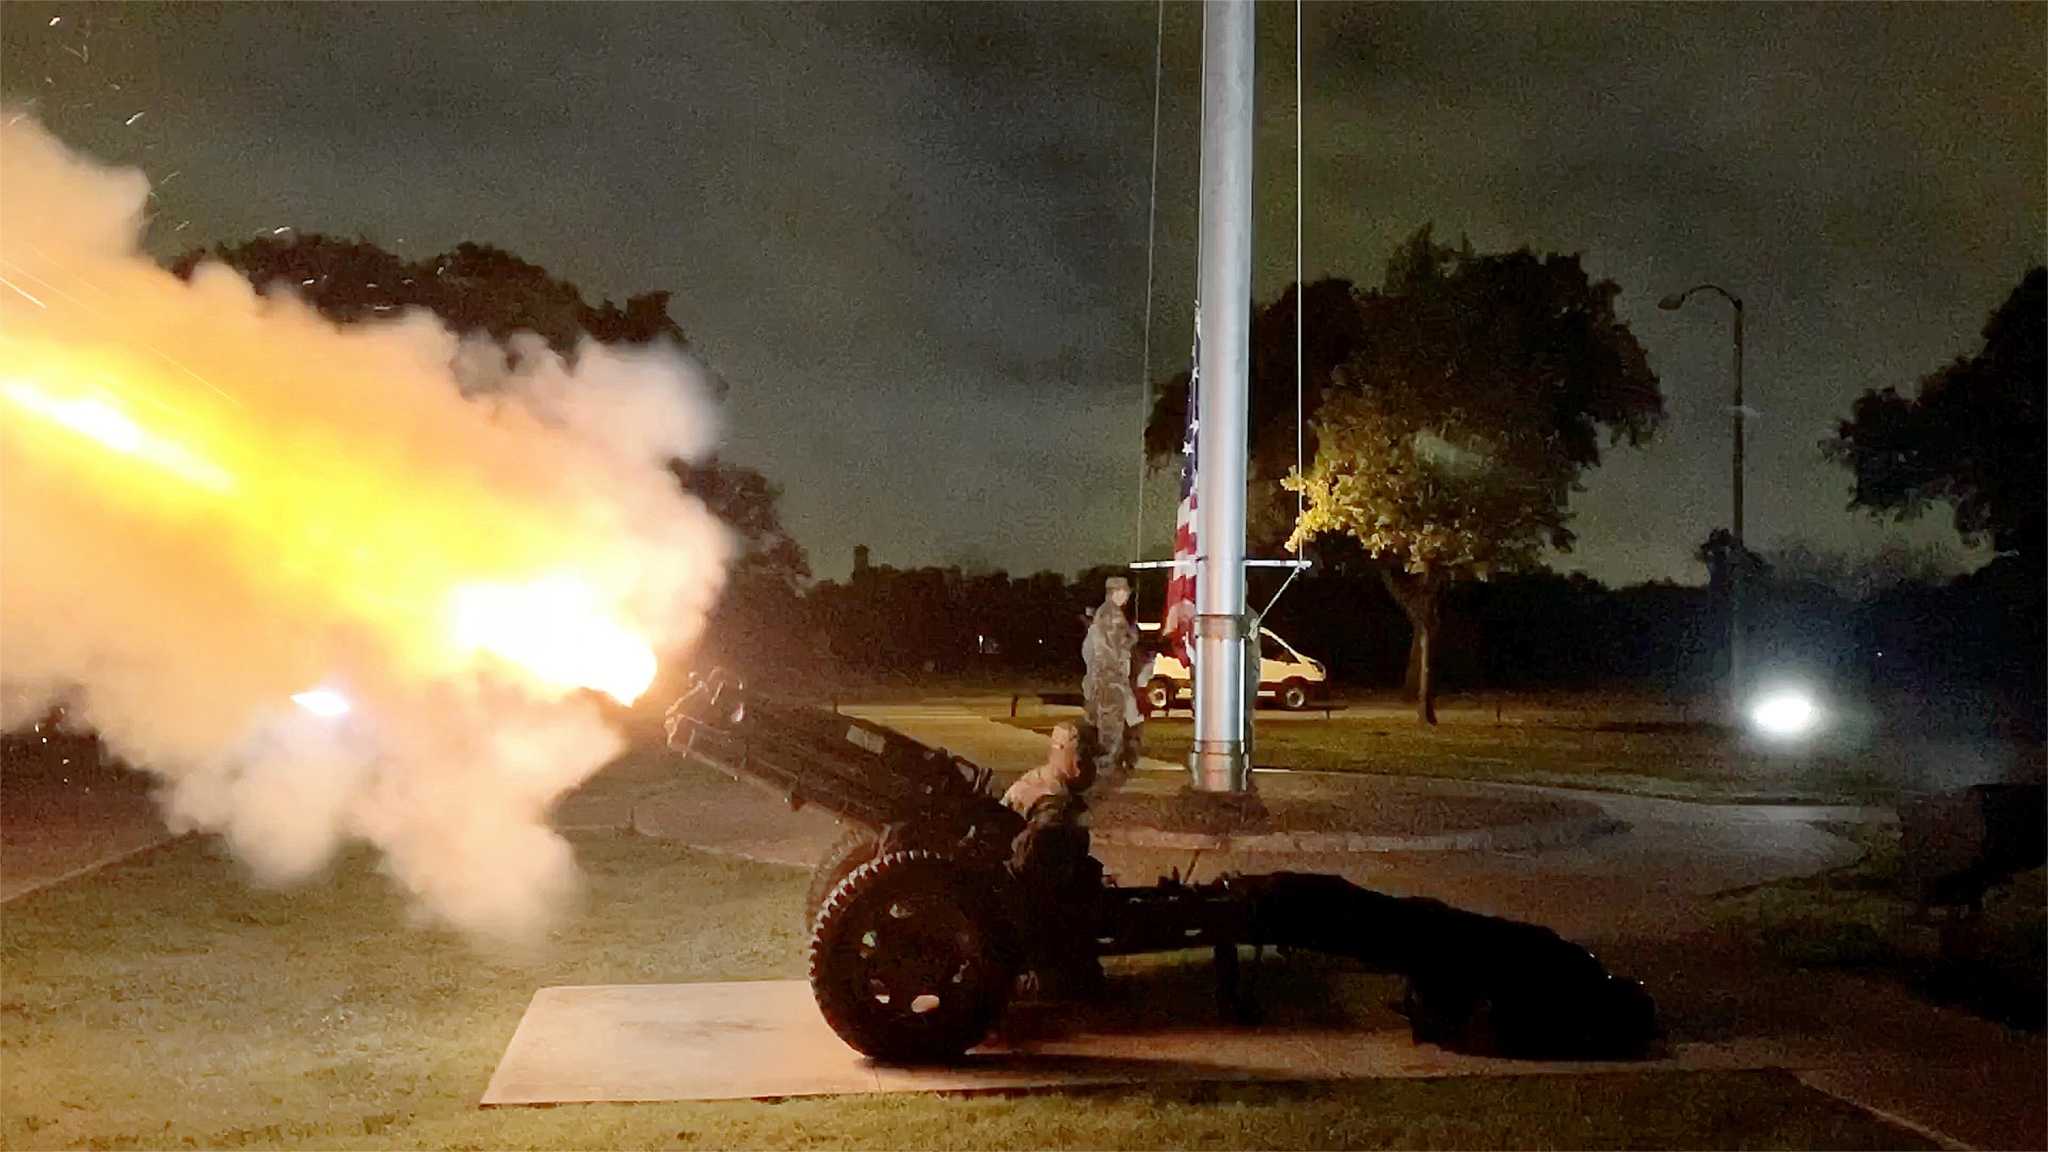 Fort Sam Houston has fired a cannon every morning and night for 125 years